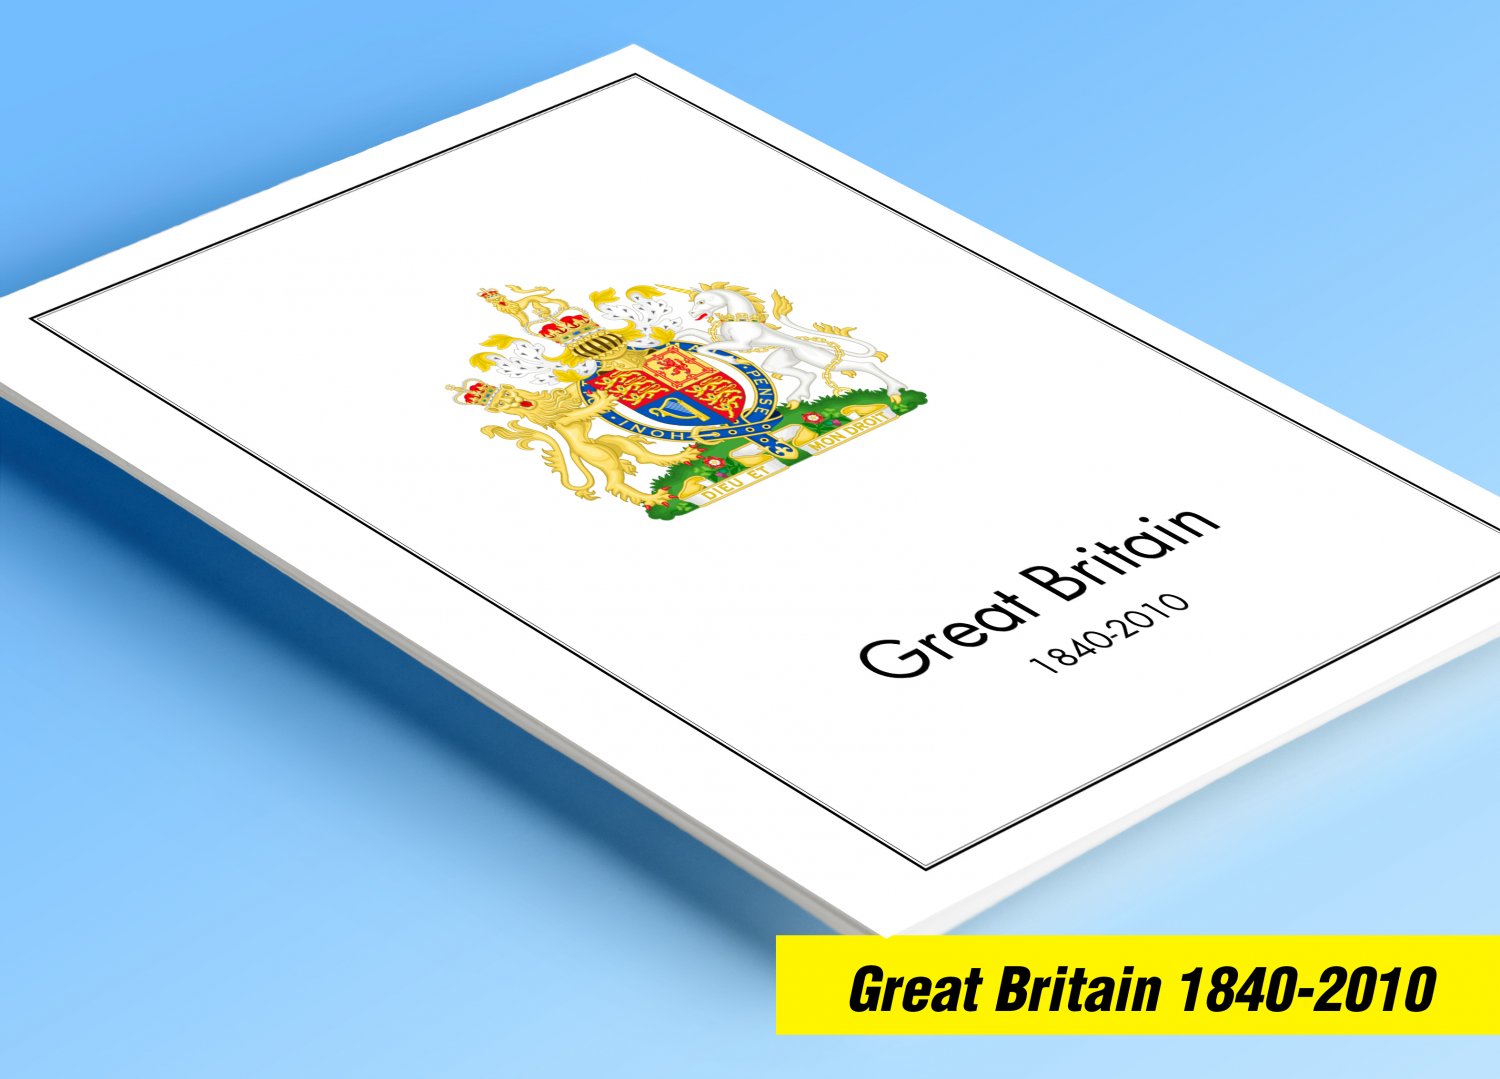 COLOR PRINTED GREAT BRITAIN 1840-2010 STAMP ALBUM PAGES (330 illustrated pages)